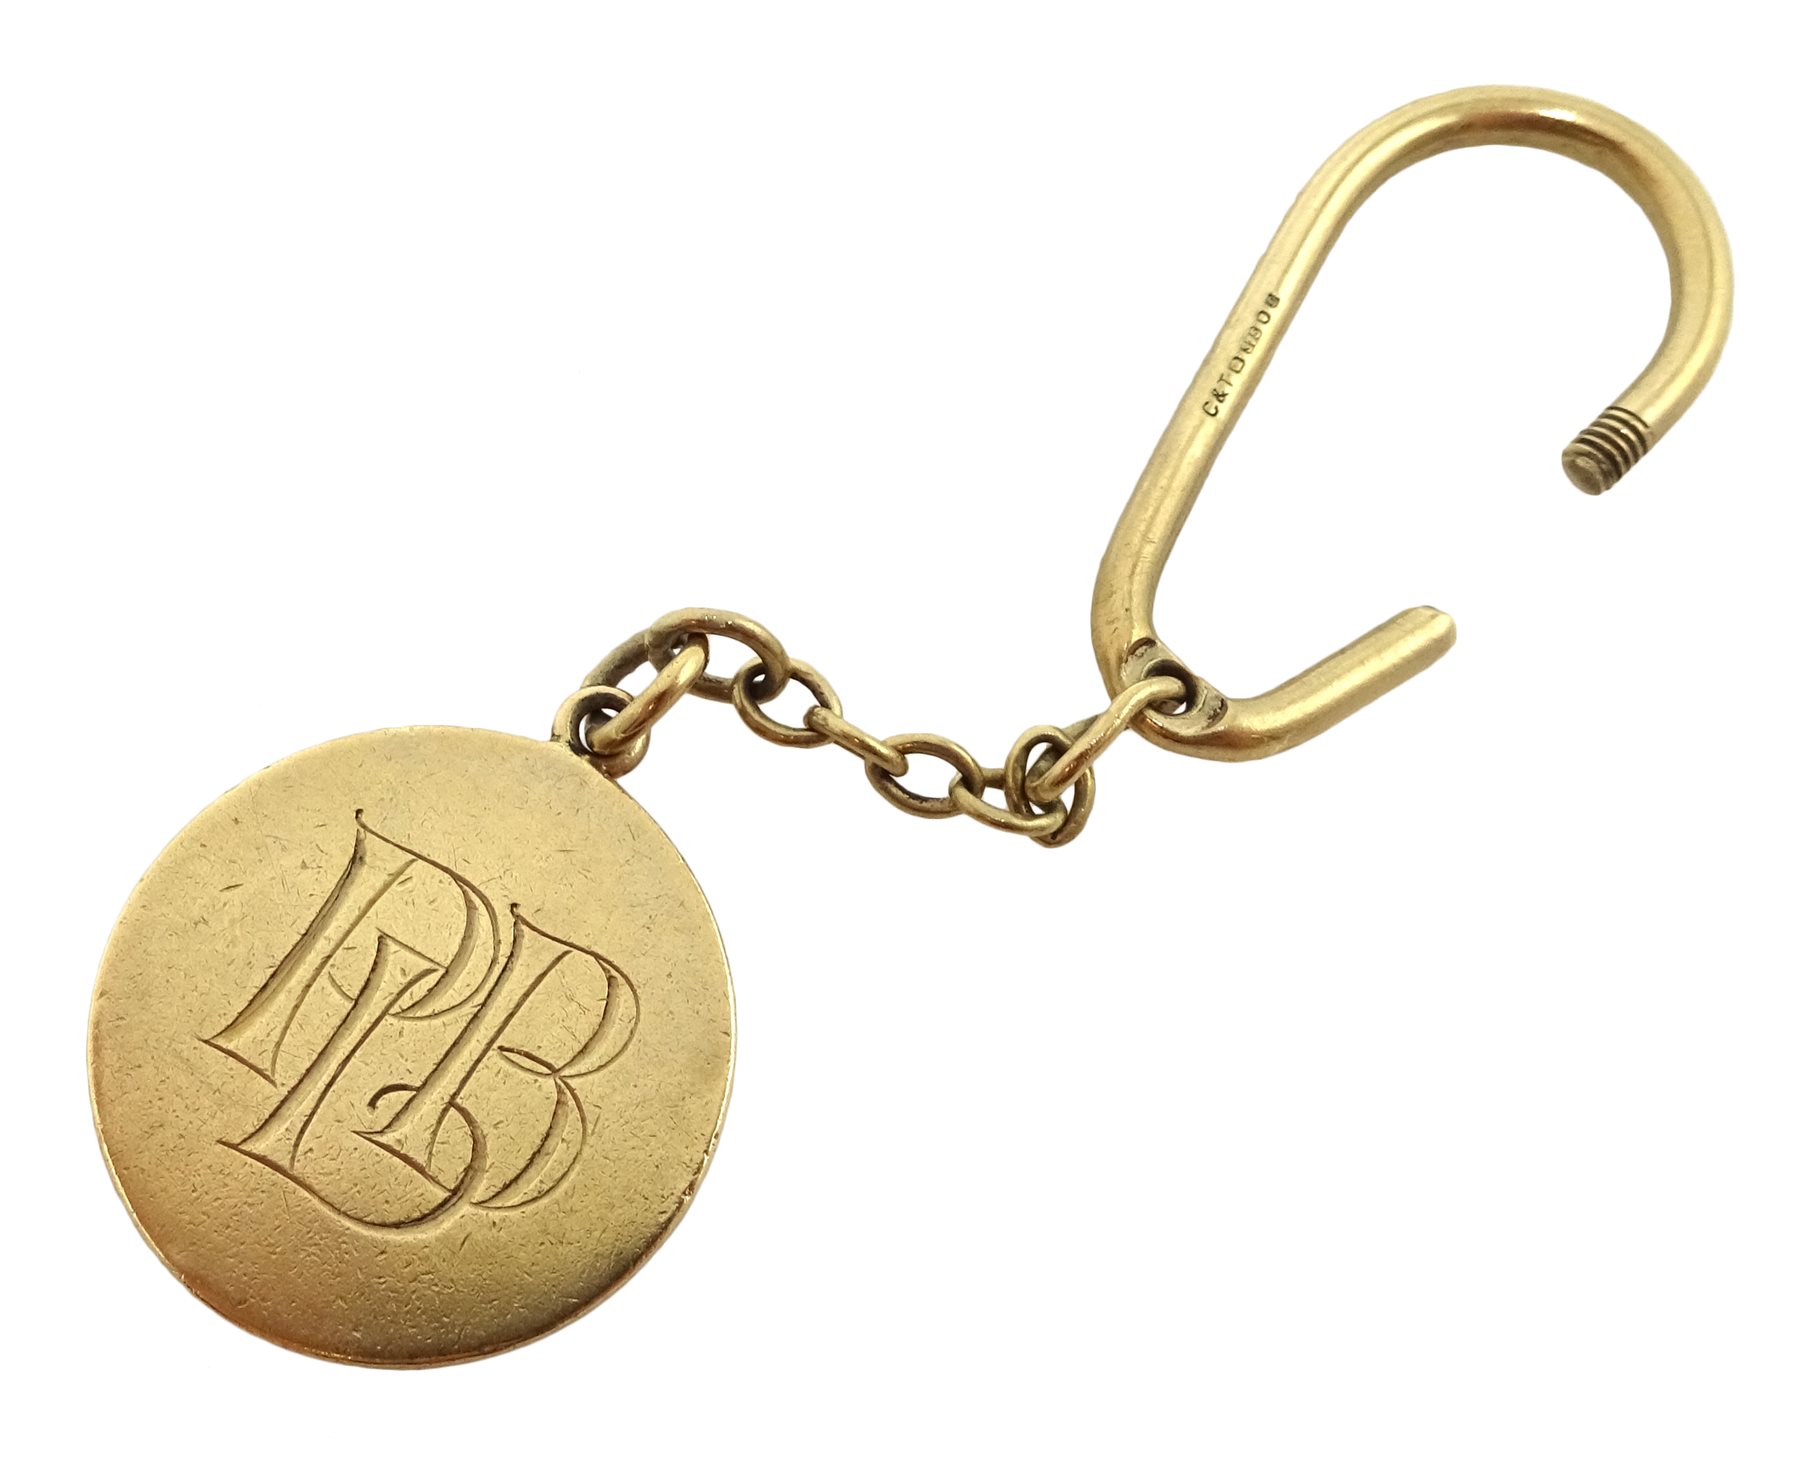 9ct gold identity pendant engraved with initials 'PLB', Birmingham 1978, approx 9.95gm